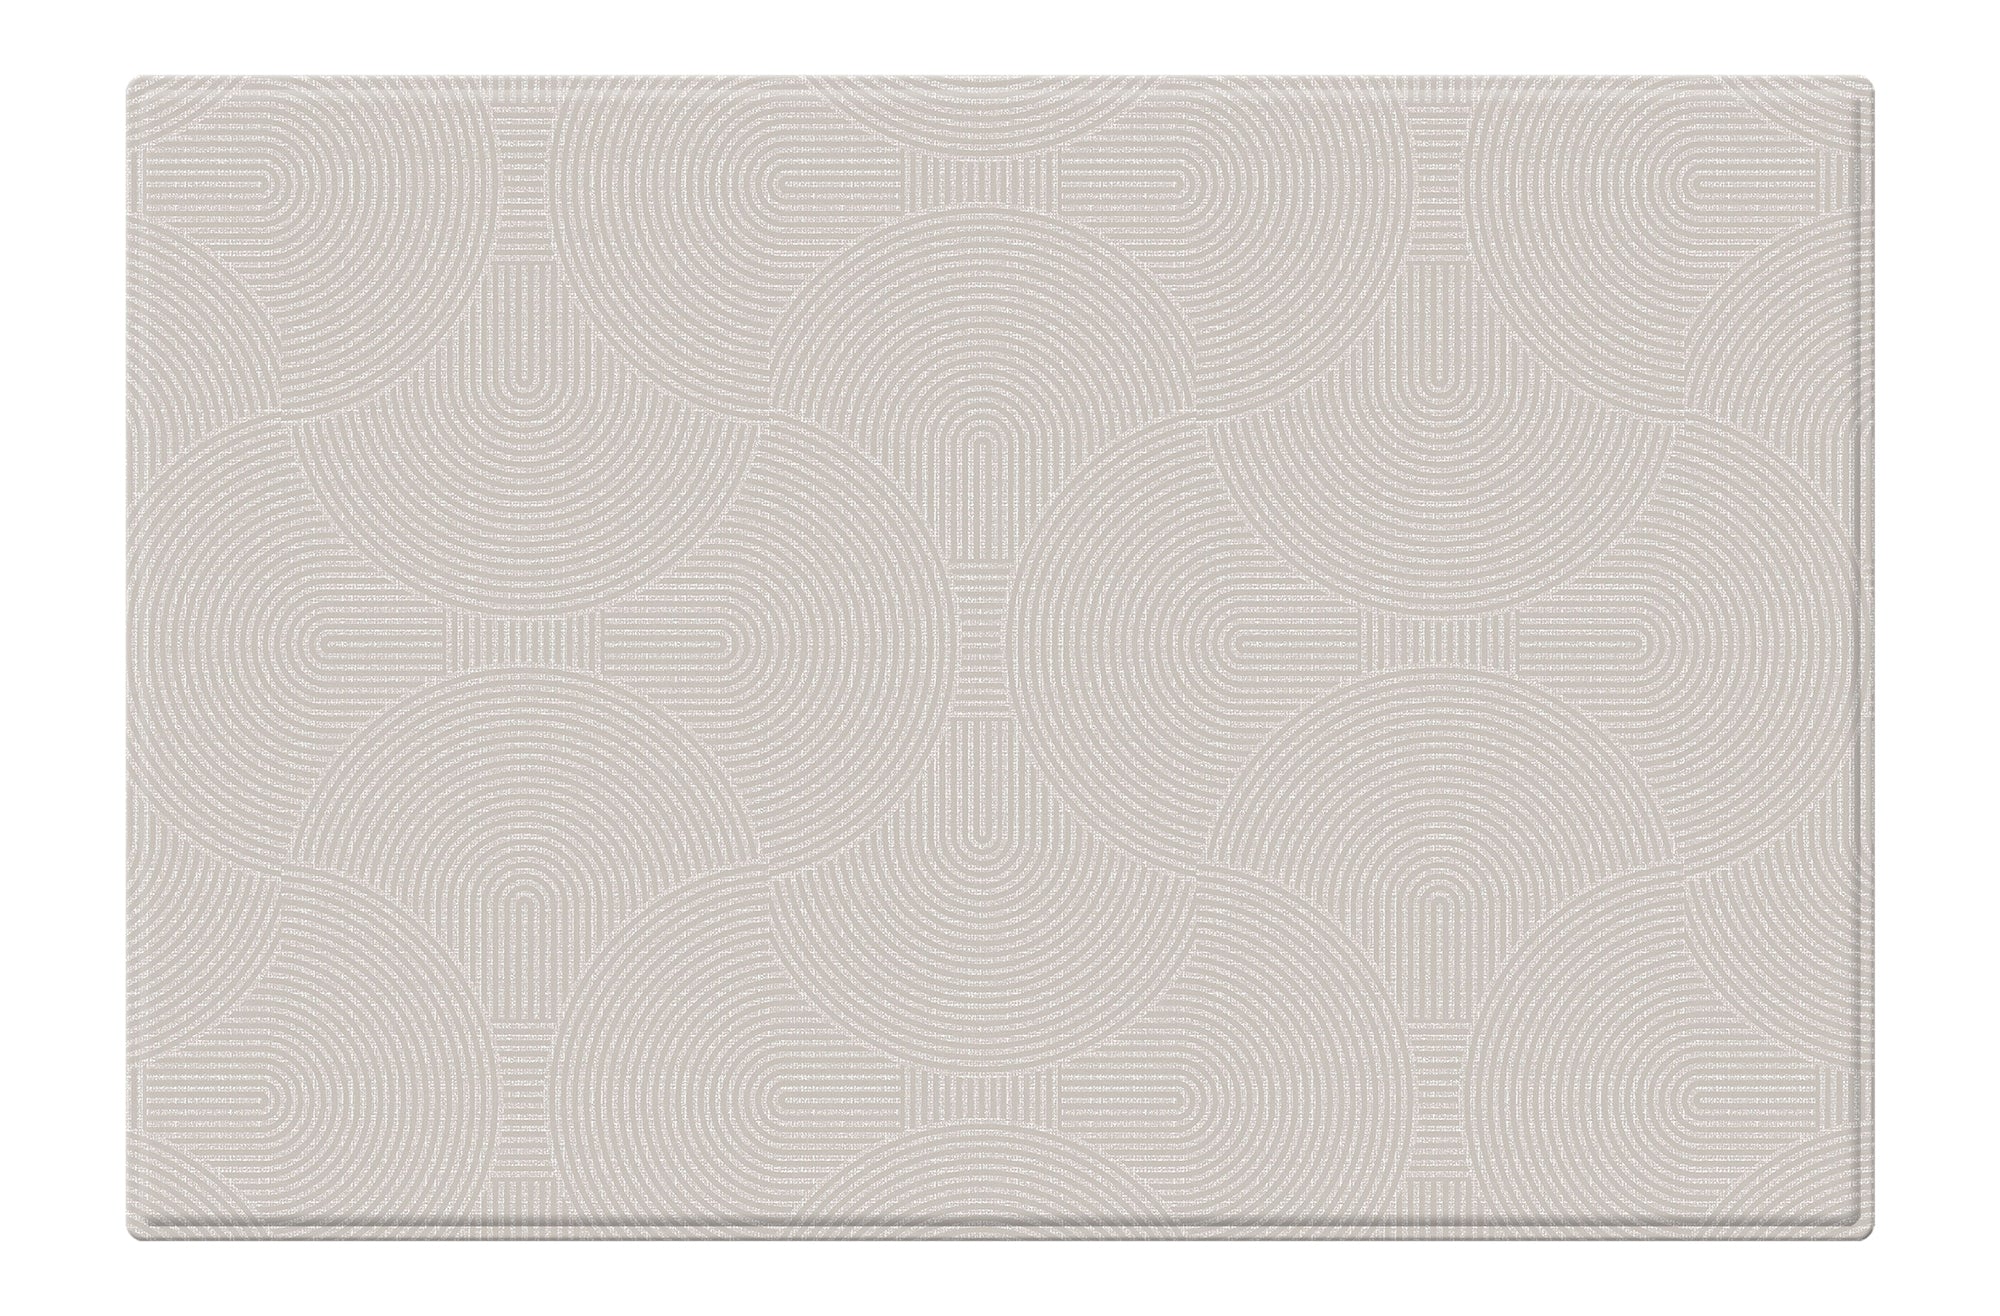 BABYCARE Playmat-Arches Beige & Nordic